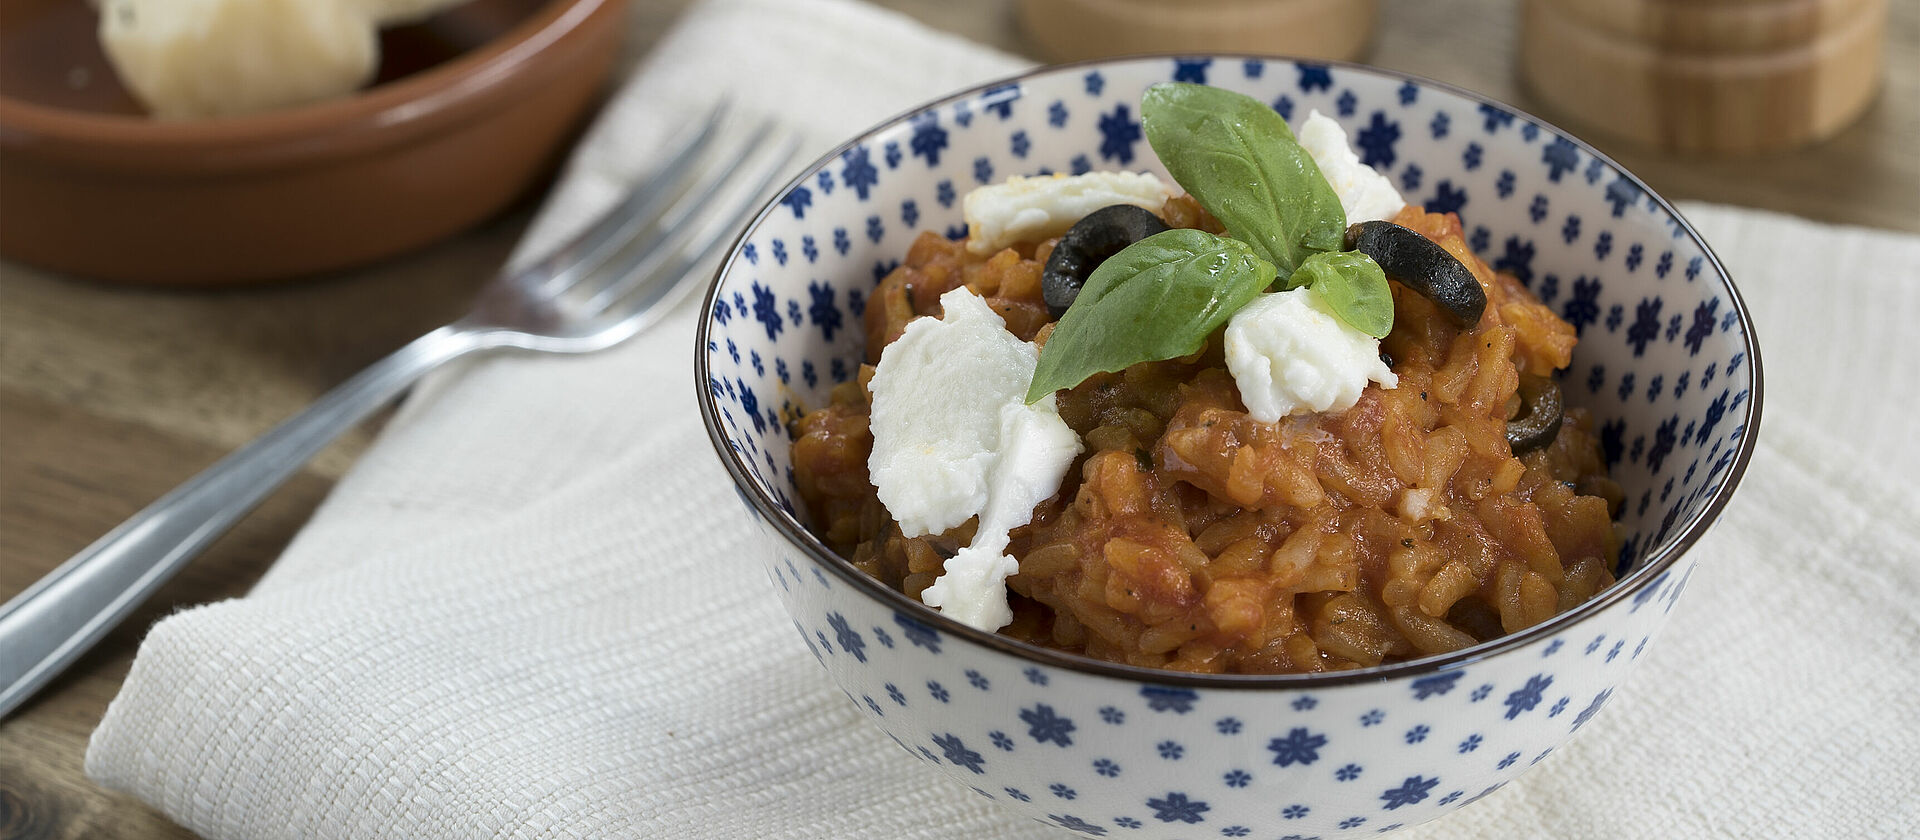 Tomato risotto with olives and basil in a blue and white bowl.